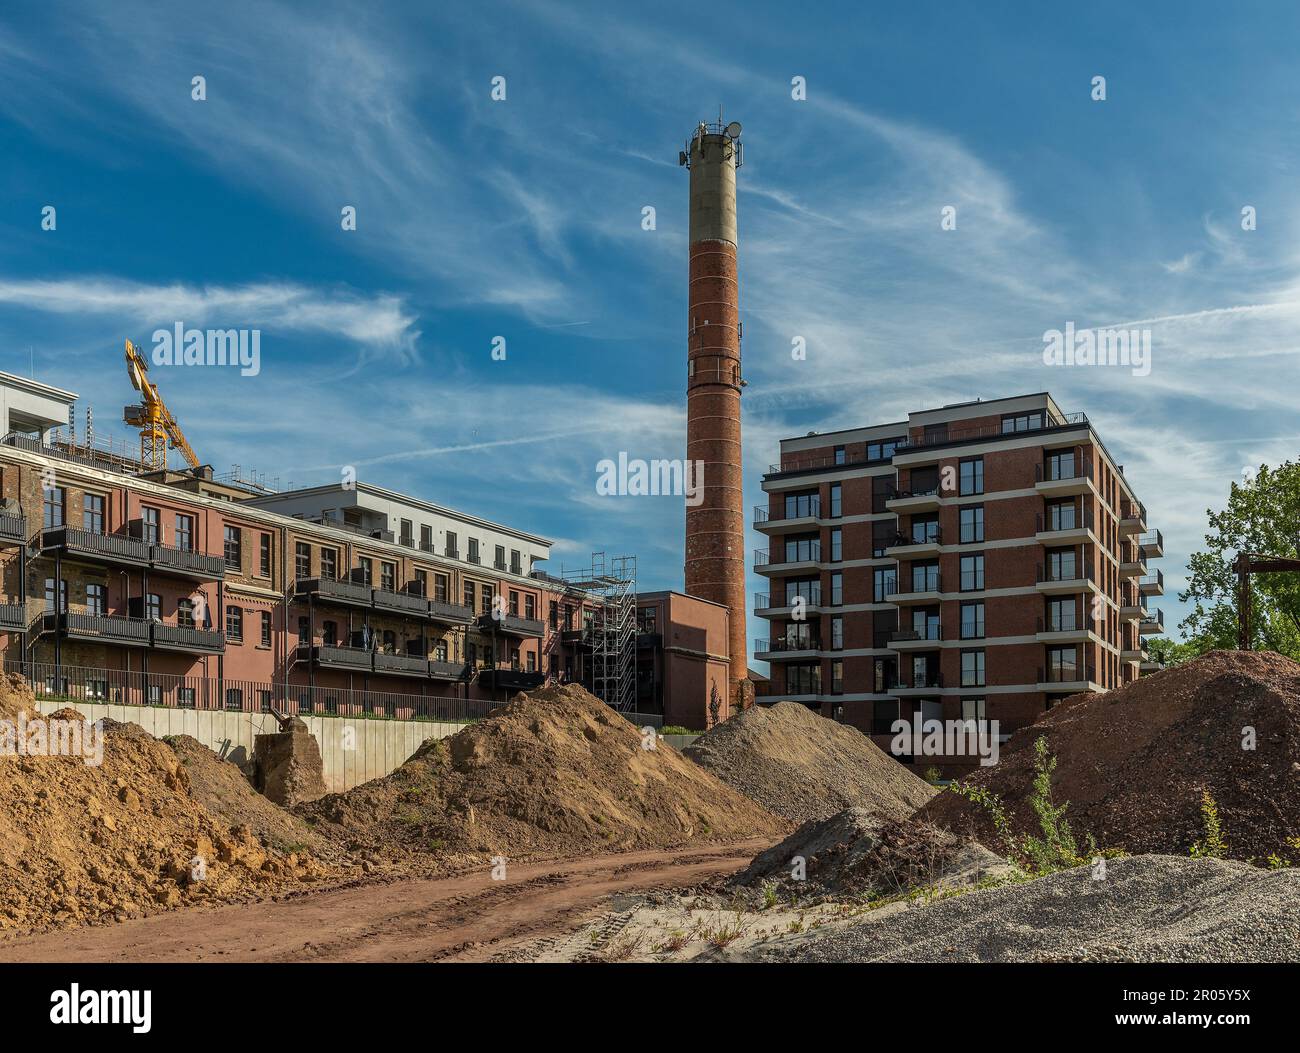 Conversion of an old paper mill into new modern lofts and apartments, Hattersheim, Germany Stock Photo